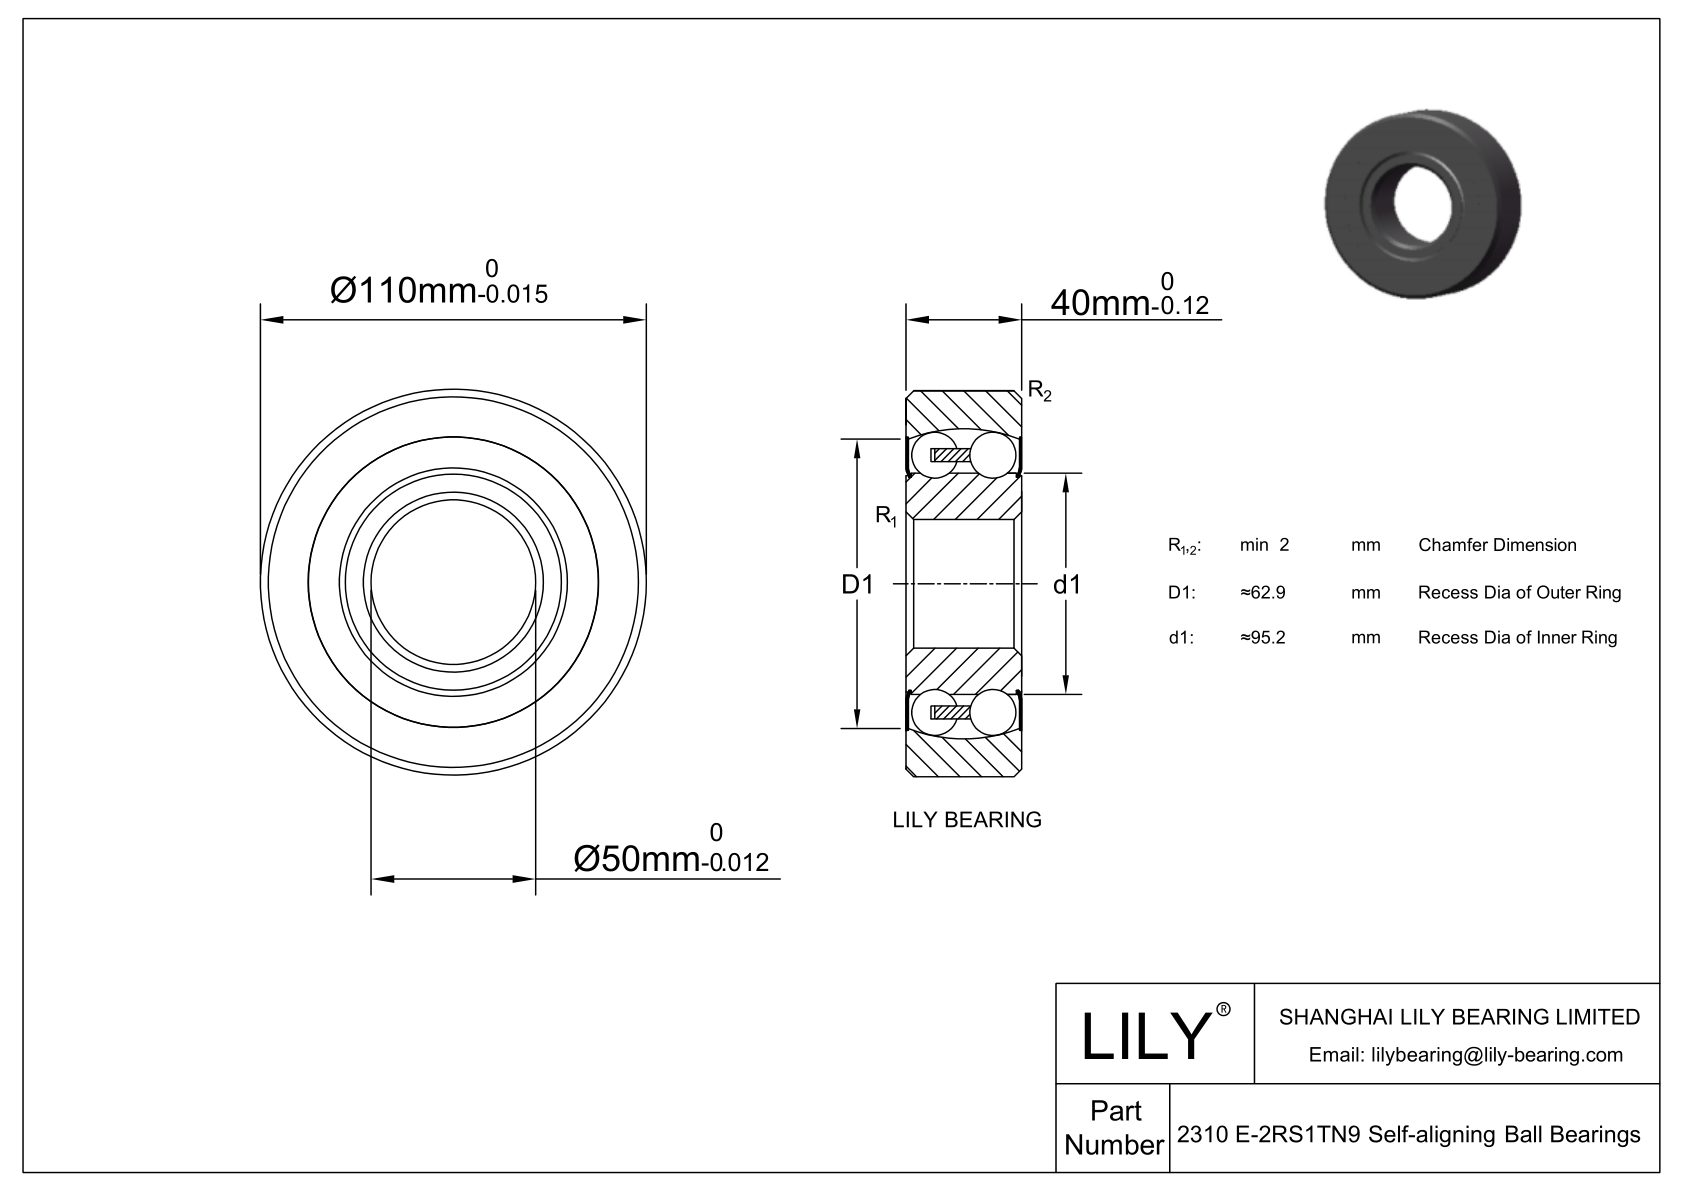 S2310 E-2RS1TN9 Stainless Steel Self Aligning Ball Bearings cad drawing